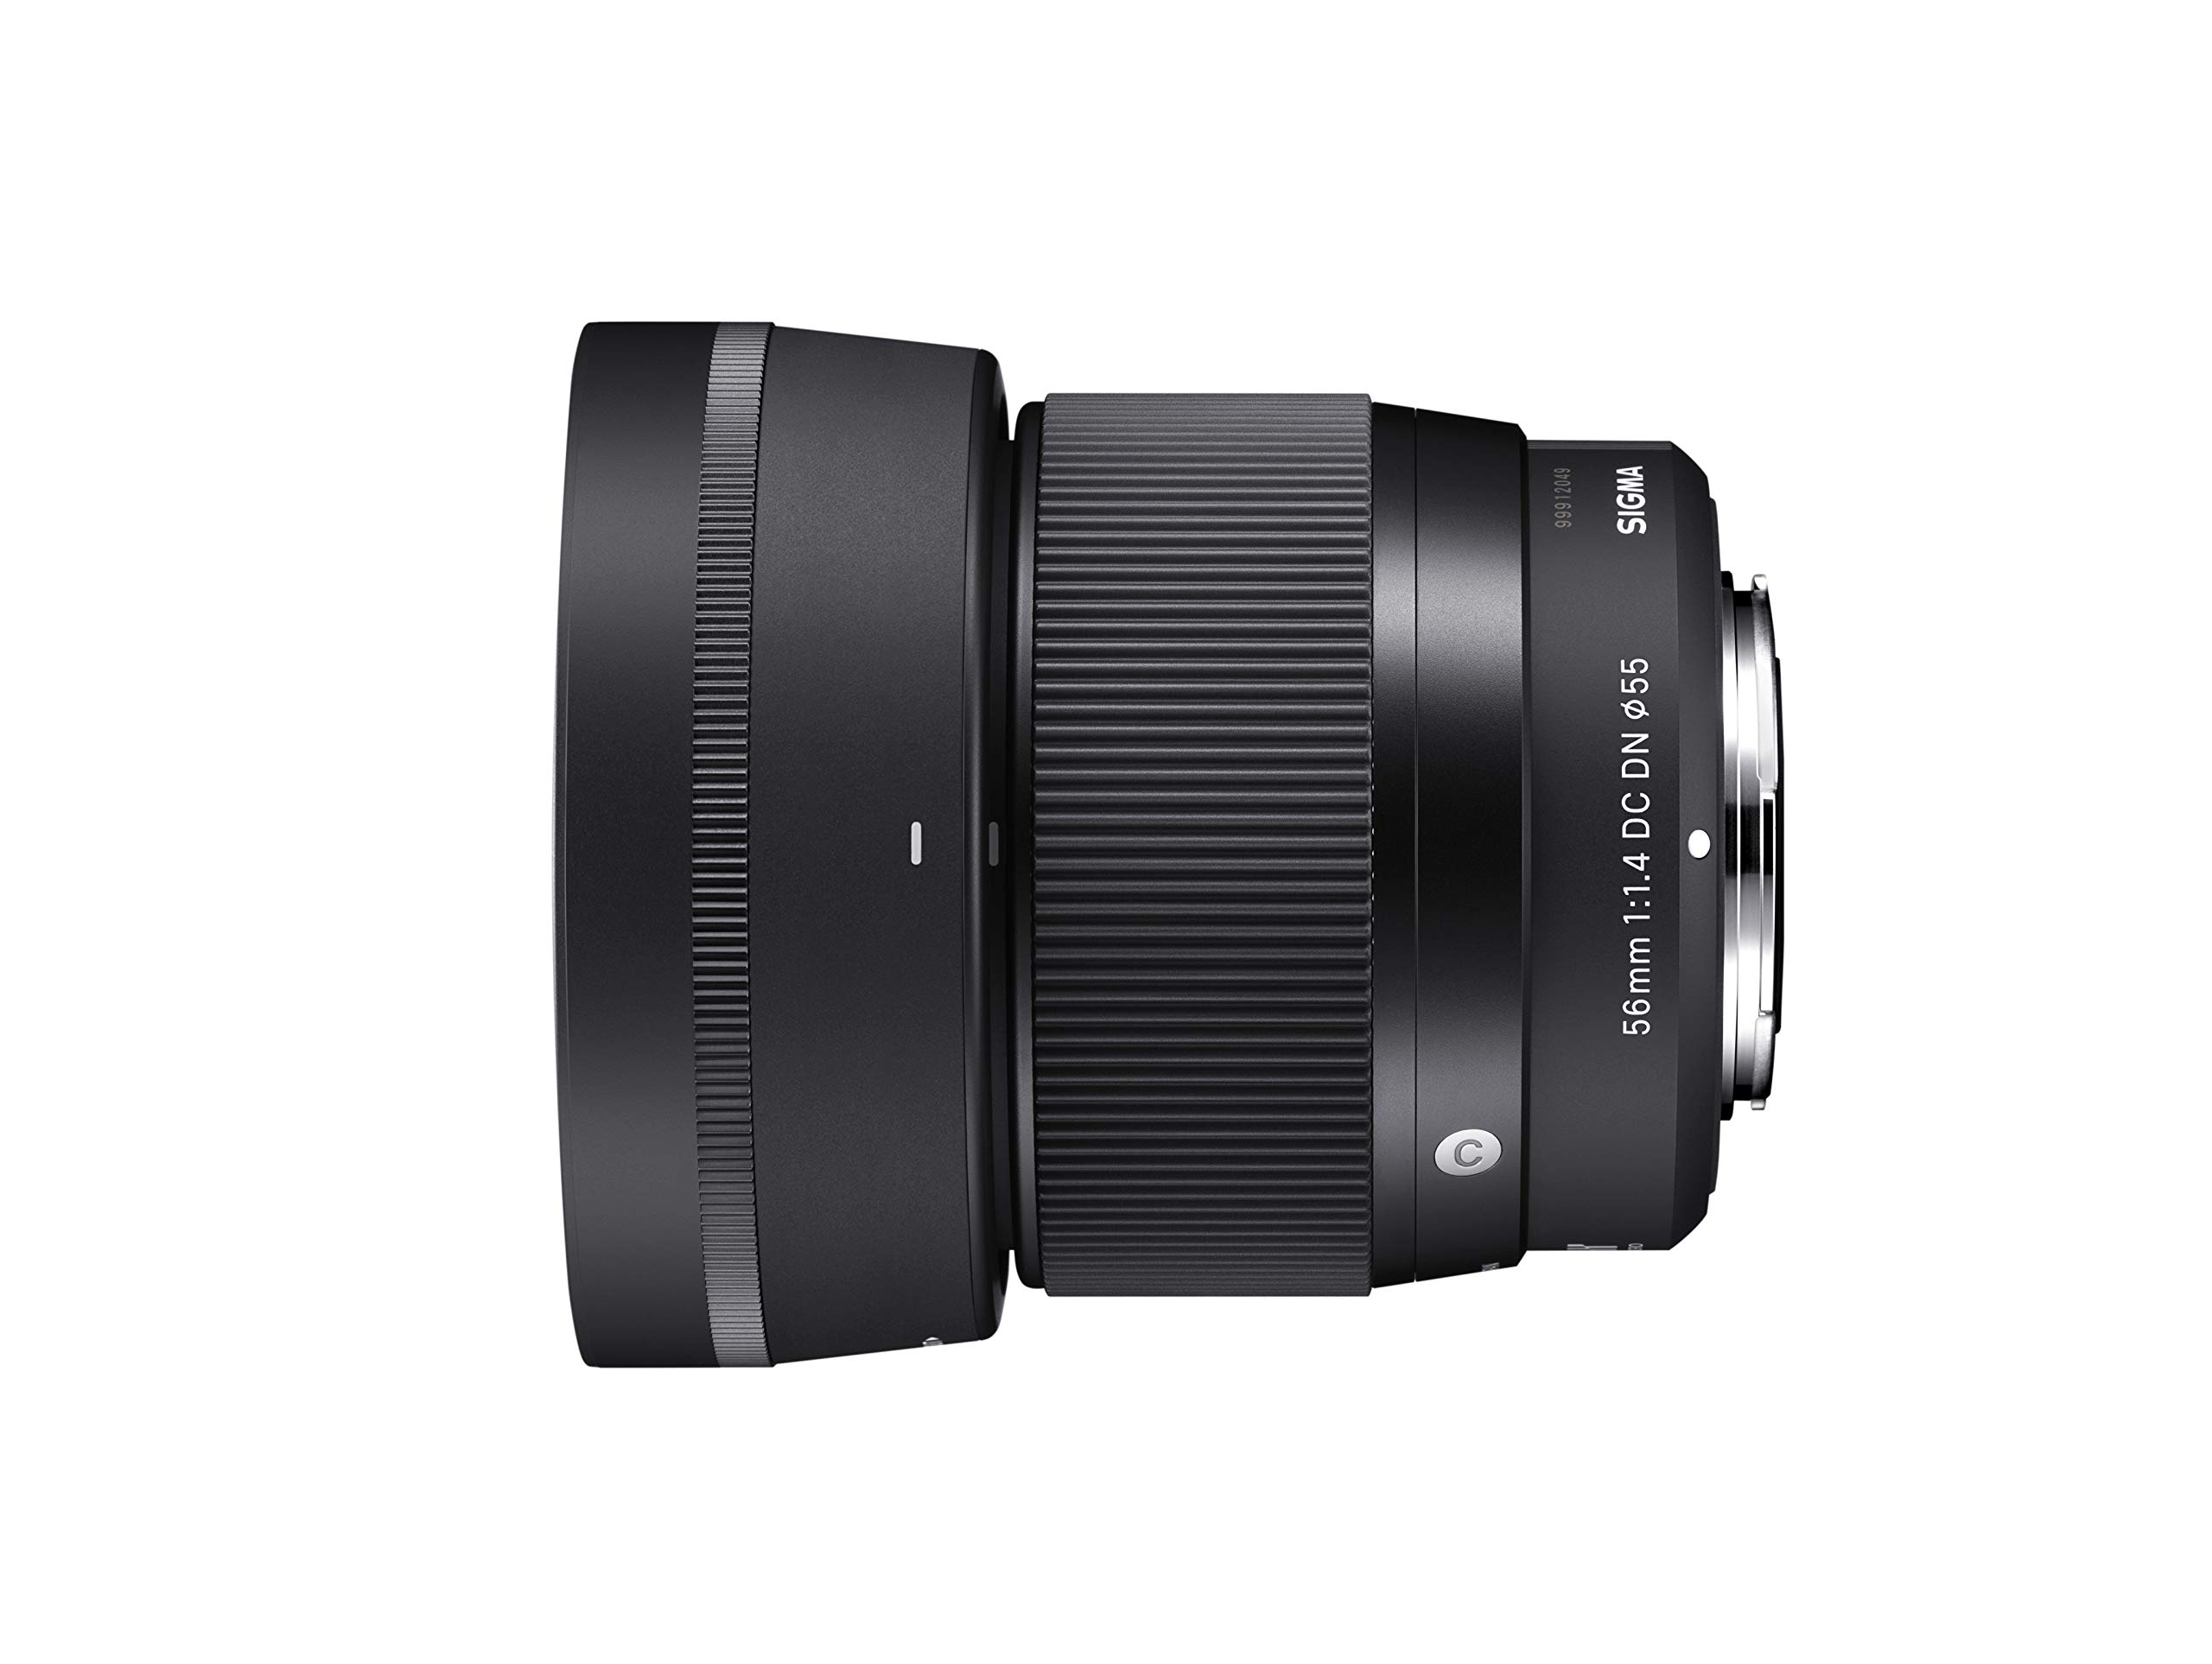 Sigma 56mm F1.4 DC DN for EF-M Mount (351971)